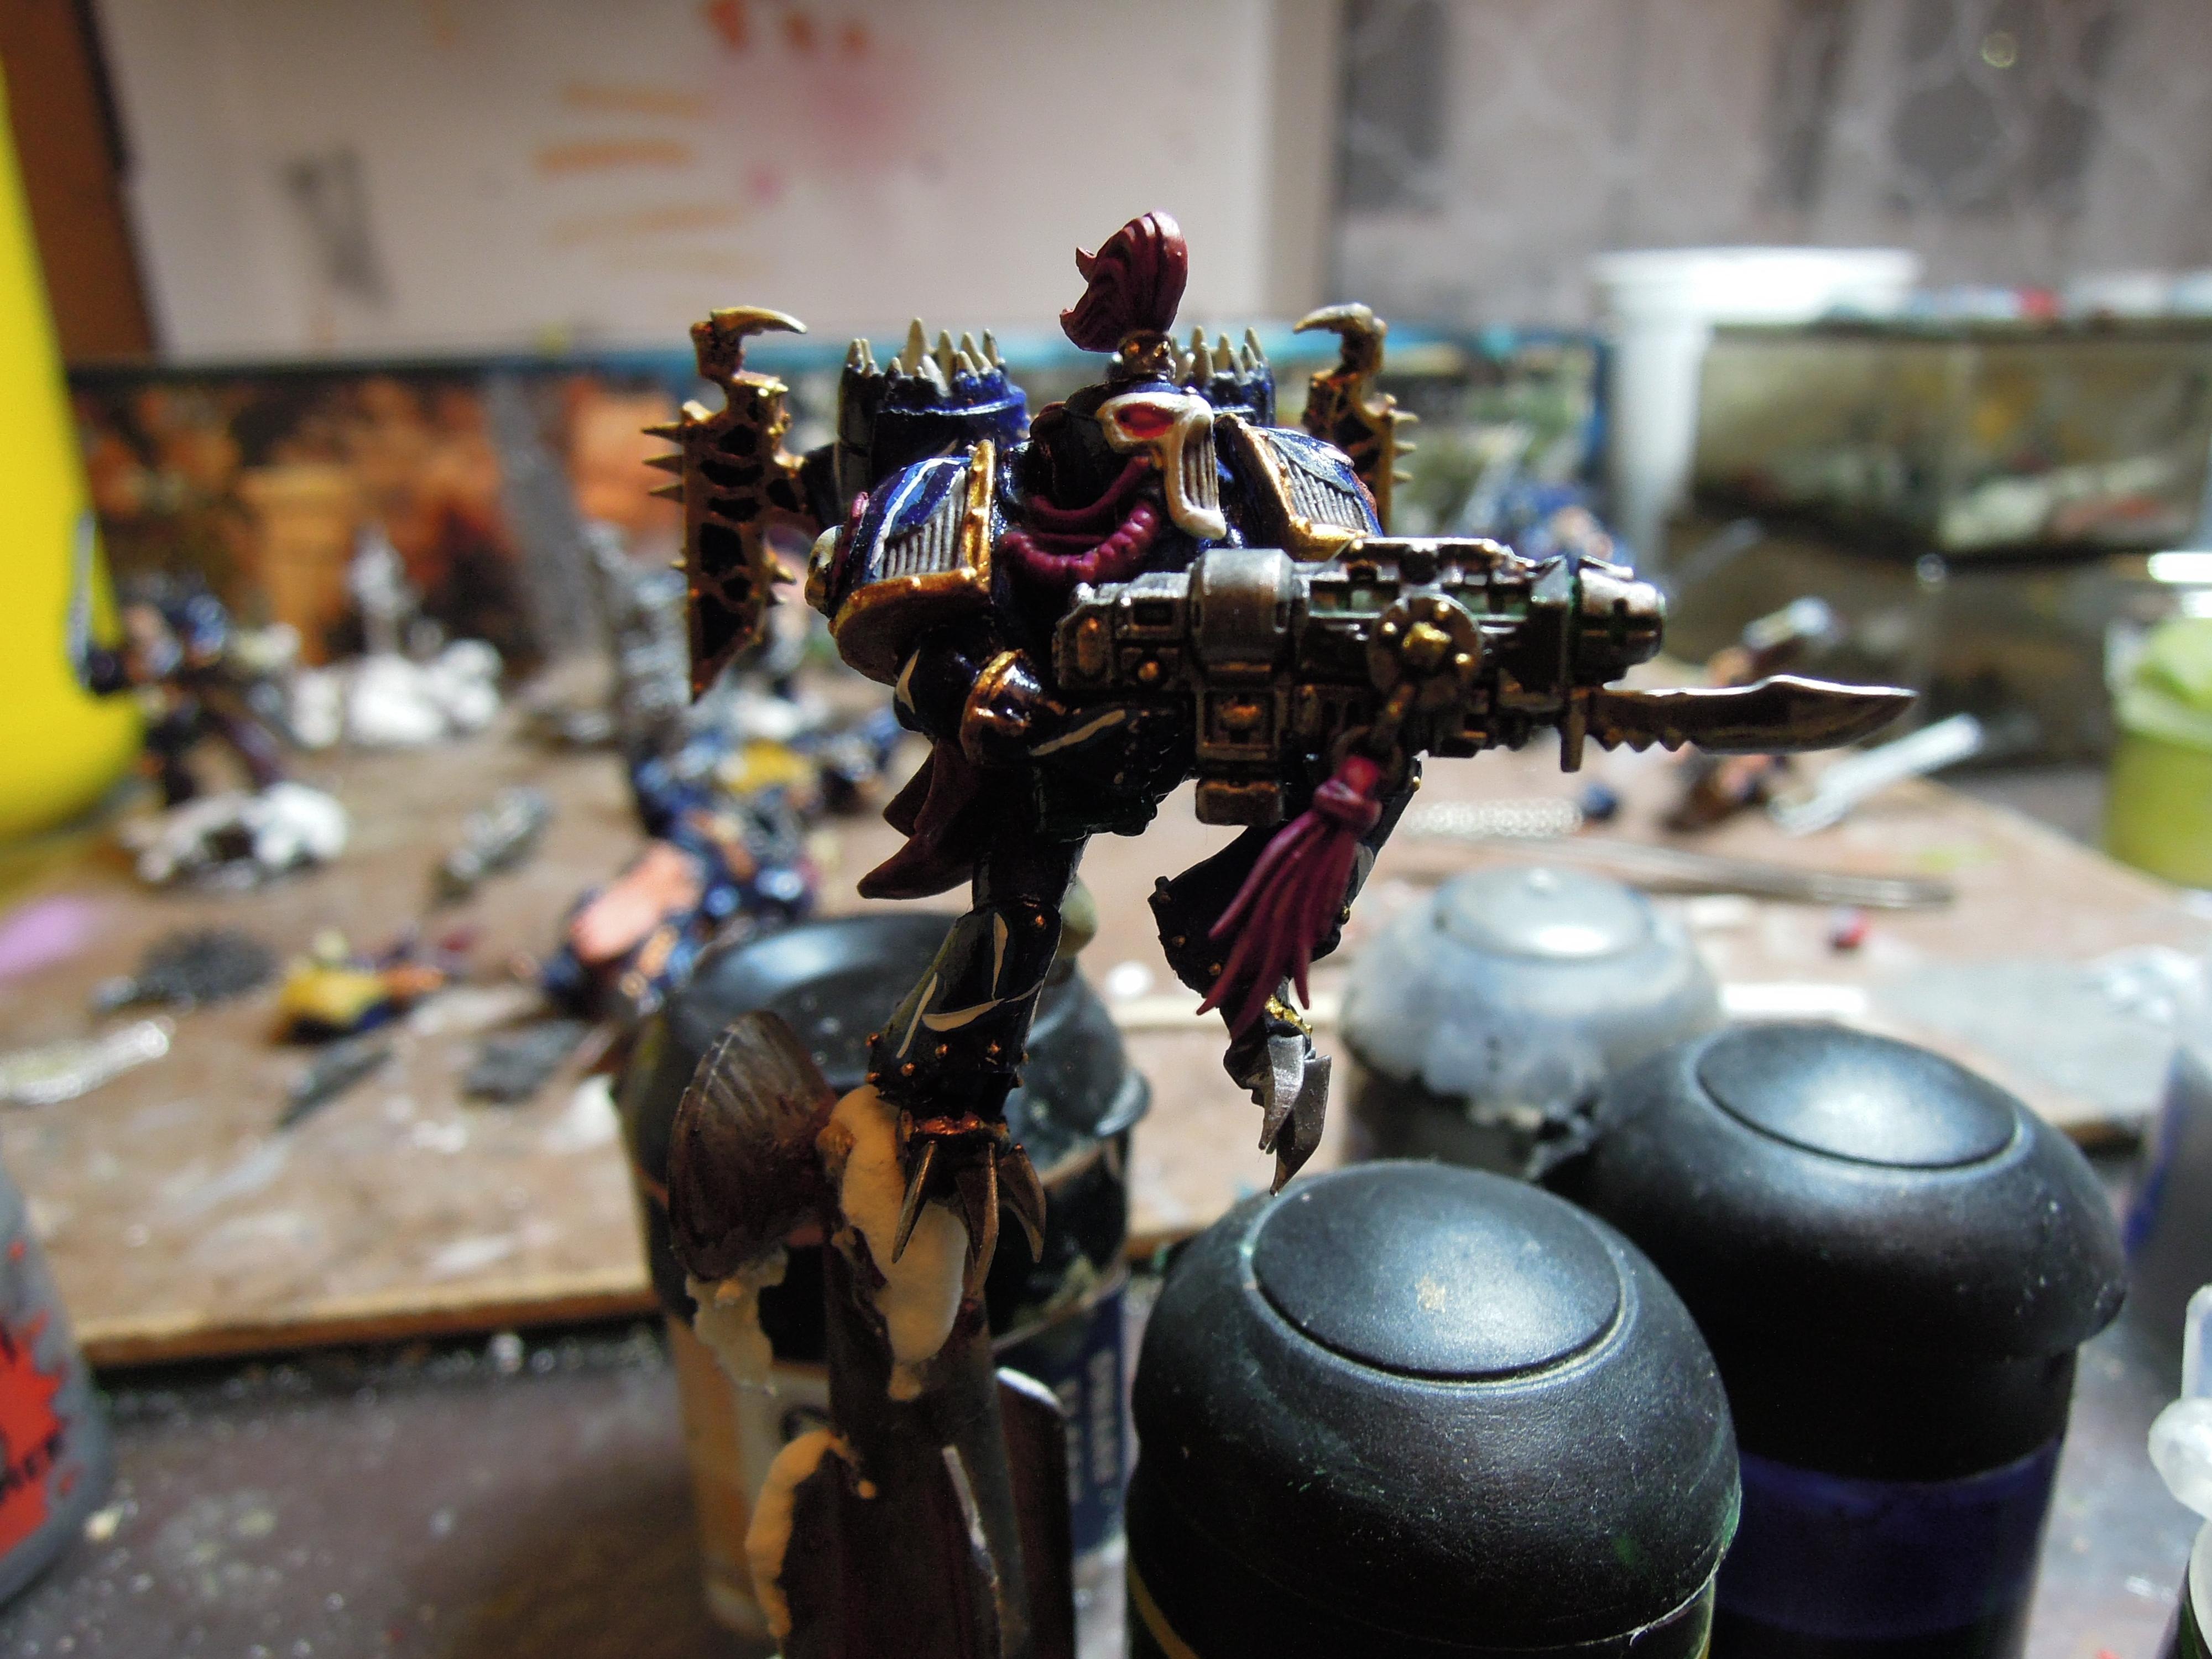 Ave Dominus Nox, Chaos, Chaos Space Marines, Chaos Undivided, Conversion, Eavy Metal, Grav Gun, Heresy, Infantry, Kitbash, Night Lords, Out Of Production, Raptors, Snow, Traitor Legions, Warhammer 40,000, Work In Progress